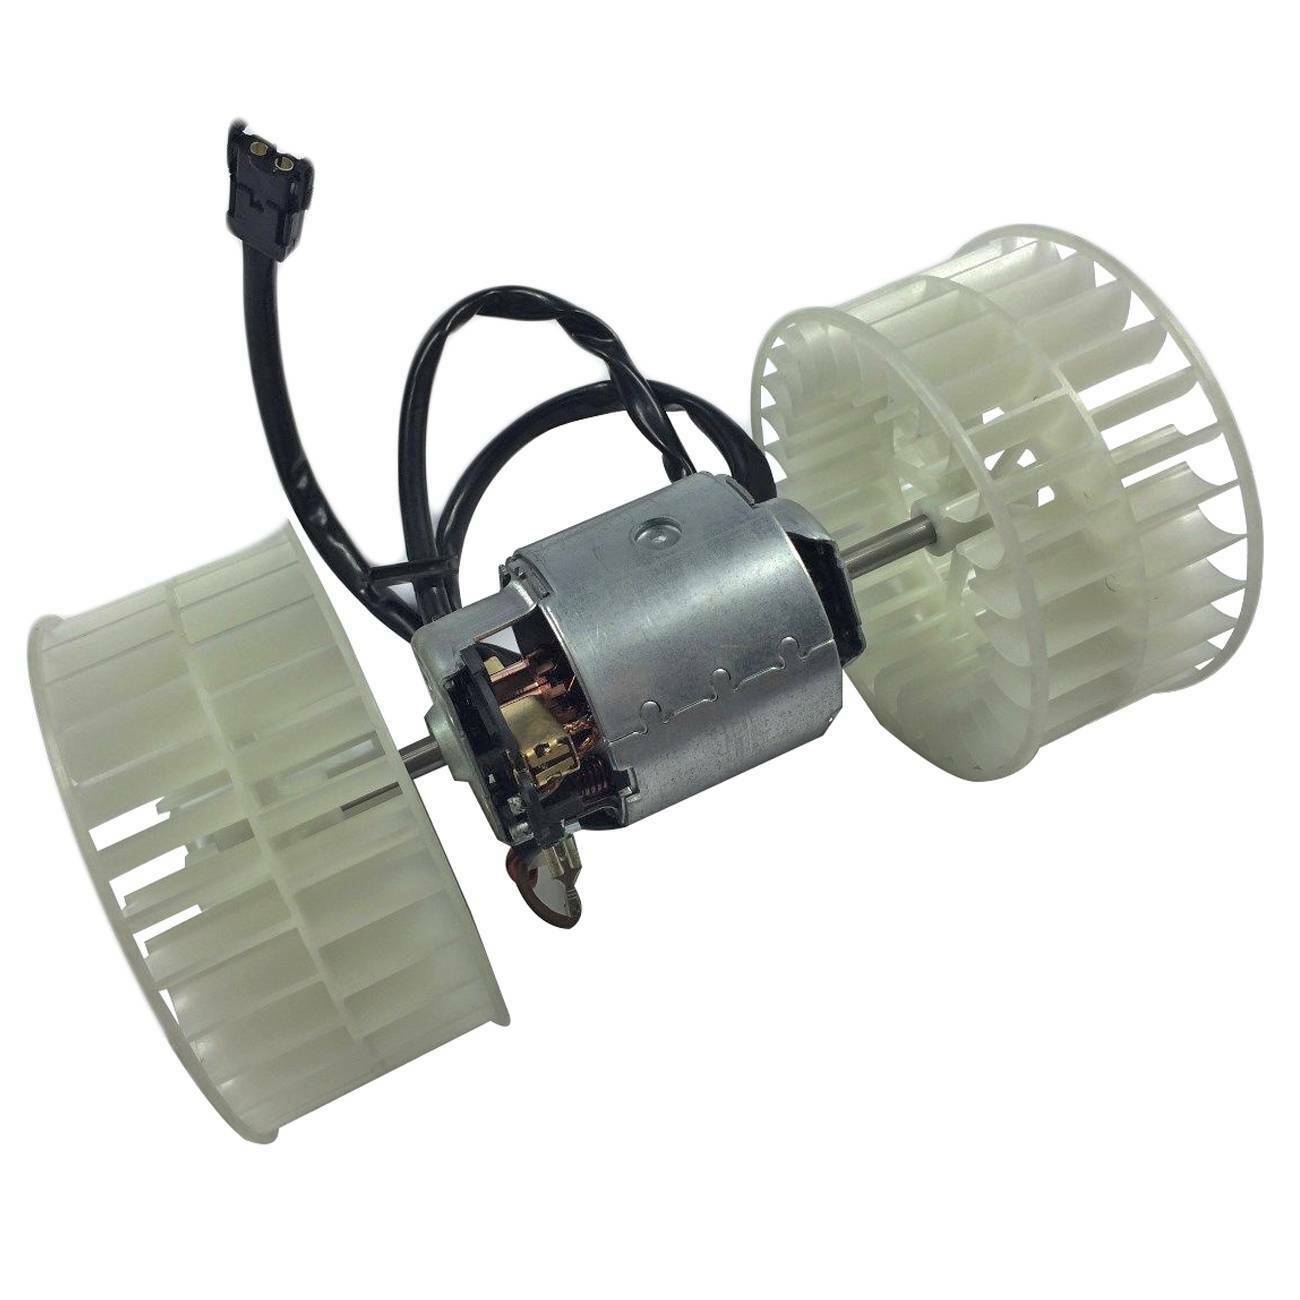 A/C Heater Blower Motor Assembly for Mercedes 190 Series W201 E1.8 2.0 2.5